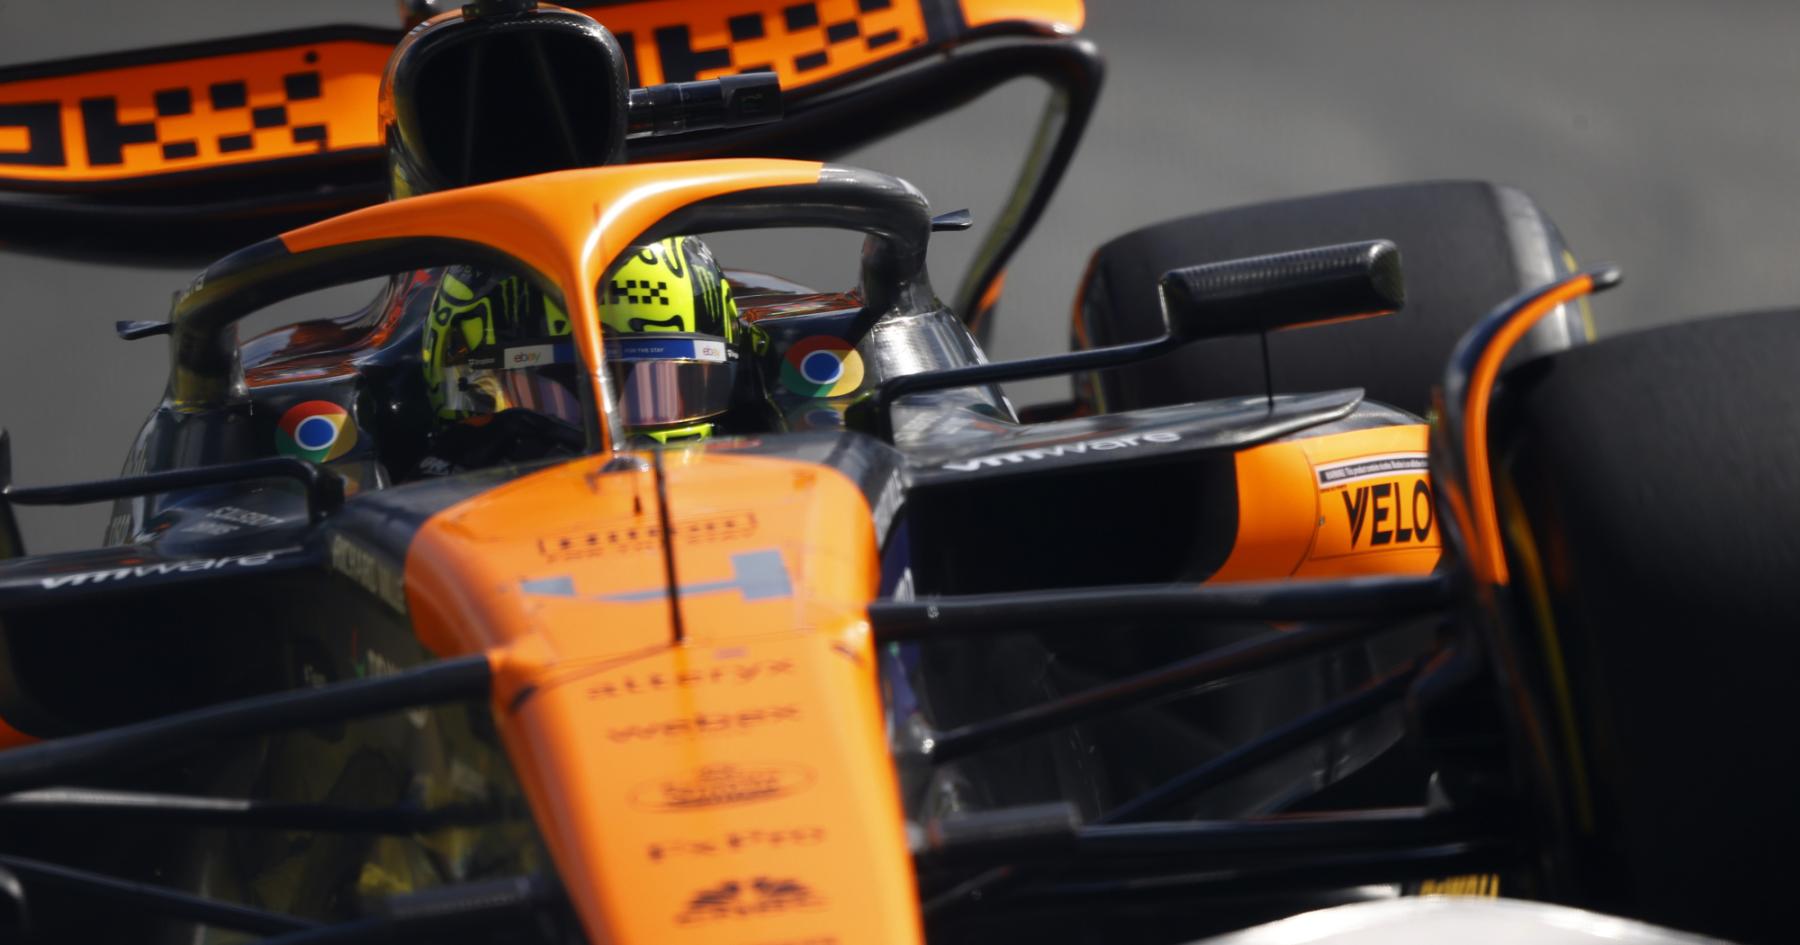 McLaren's Miami Momentum: Elevating the Red Bull Battle with Major Upgrades